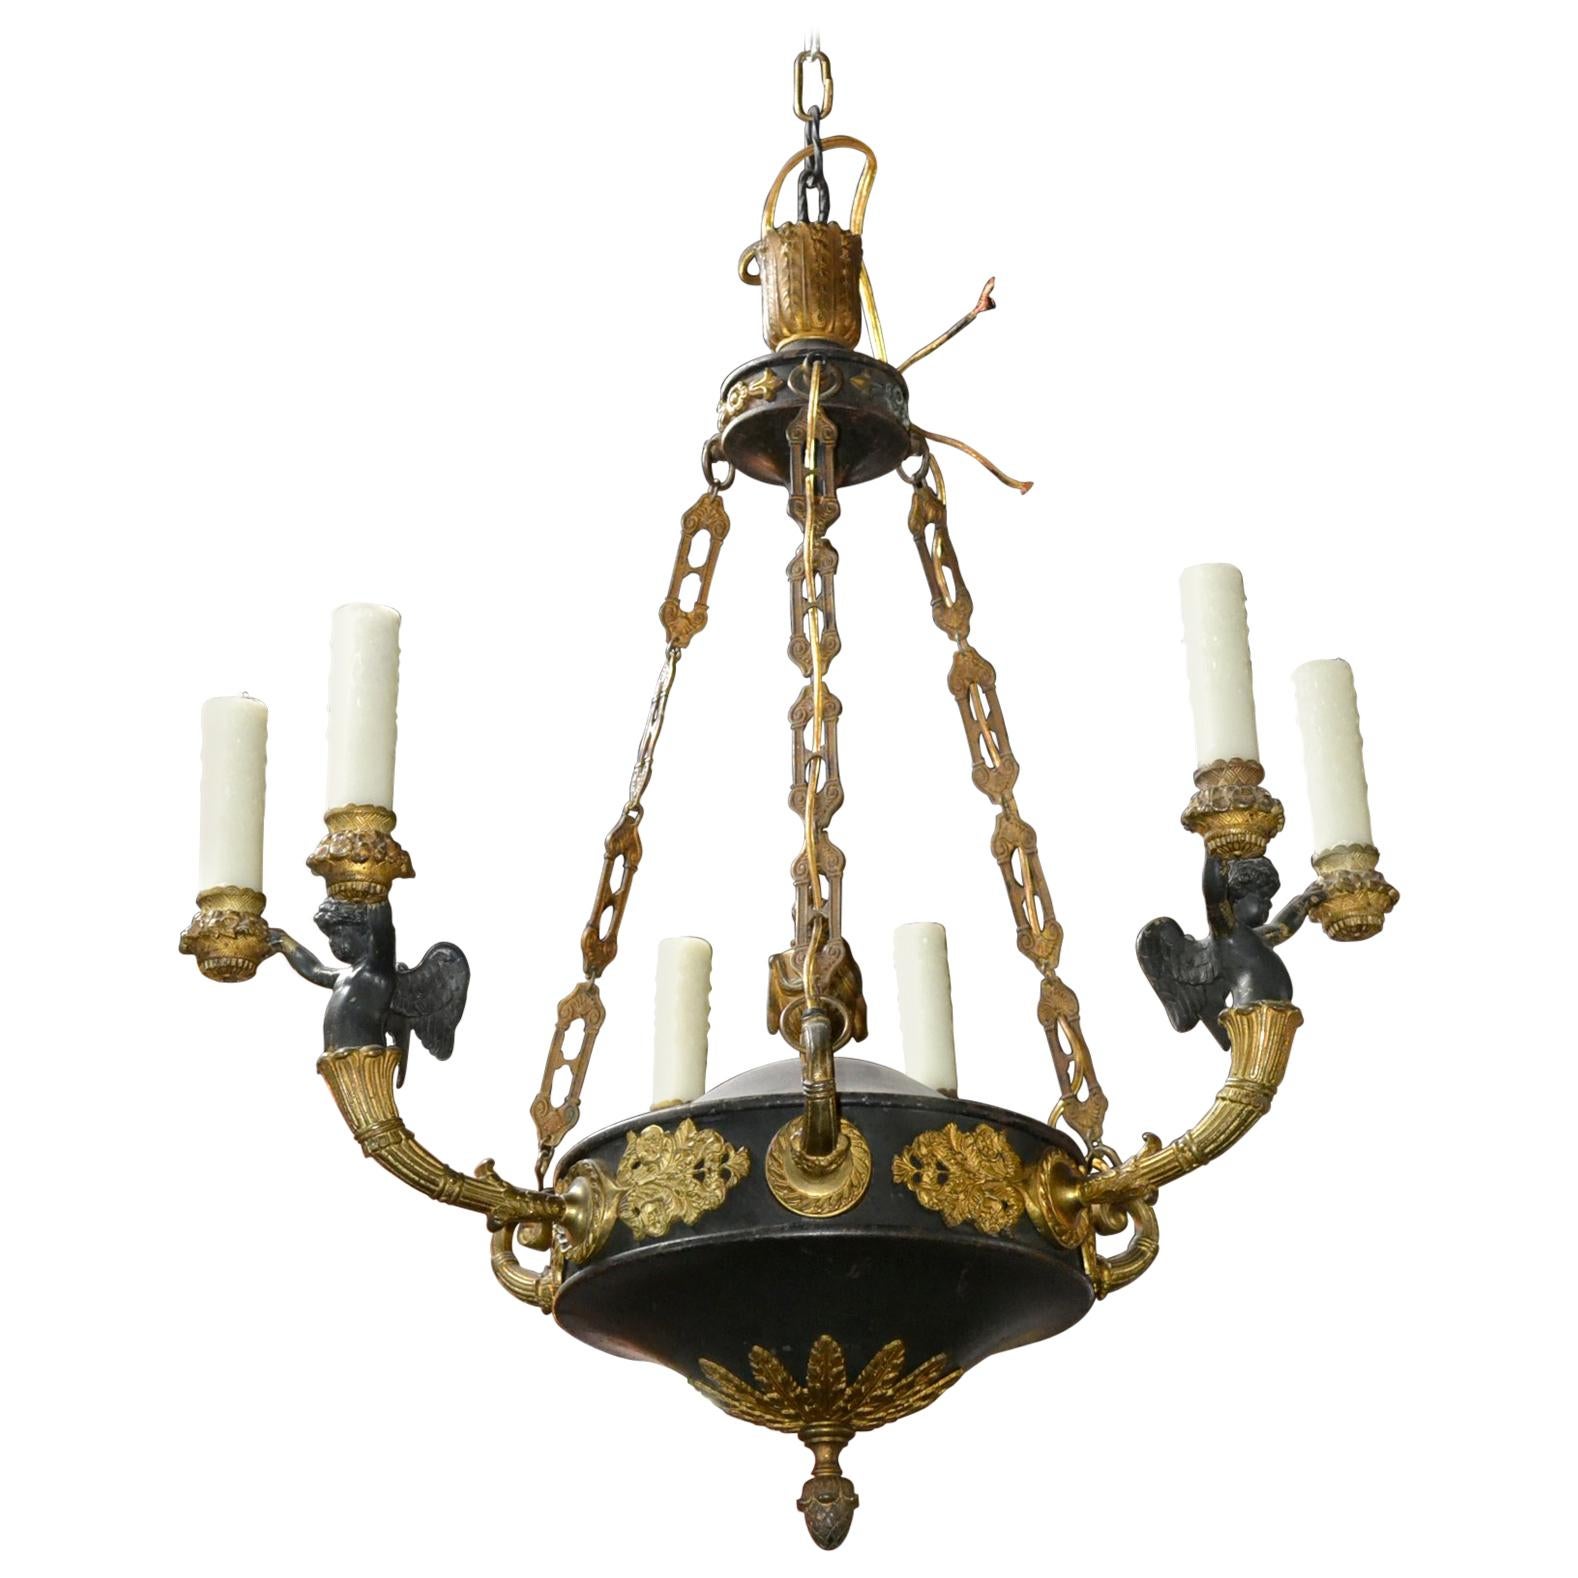 19th Century French Empire Chandelier